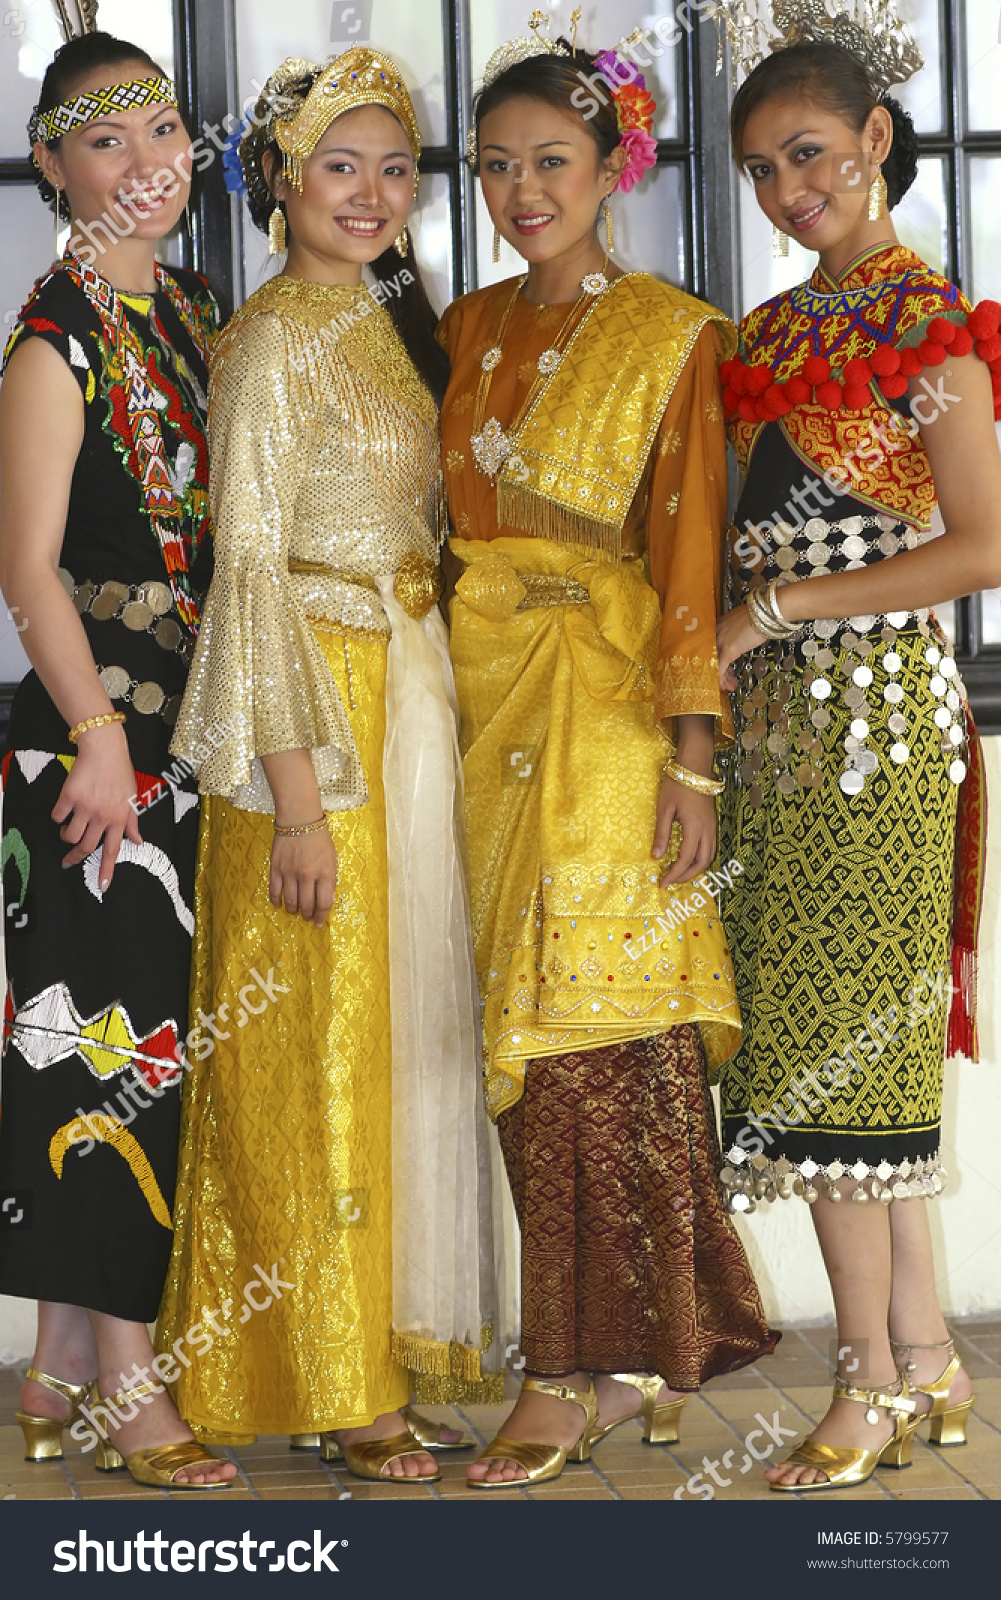 A Multi Ethnic Races In Malaysia Wearing Traditional Costumes Stock ...